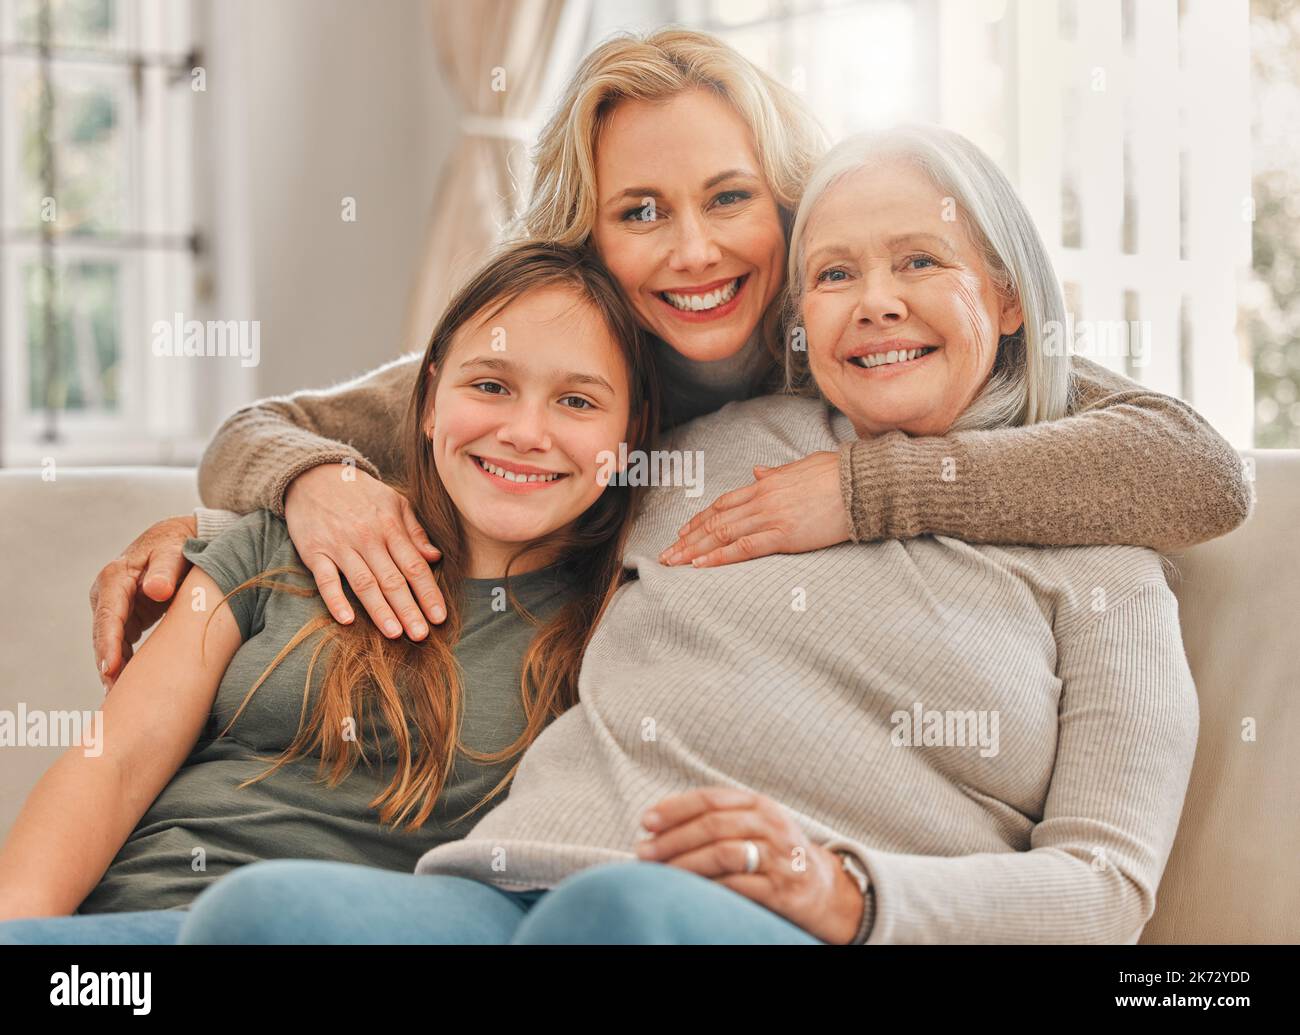 Theres more than enough love to go around. a family relaxing together at home. Stock Photo